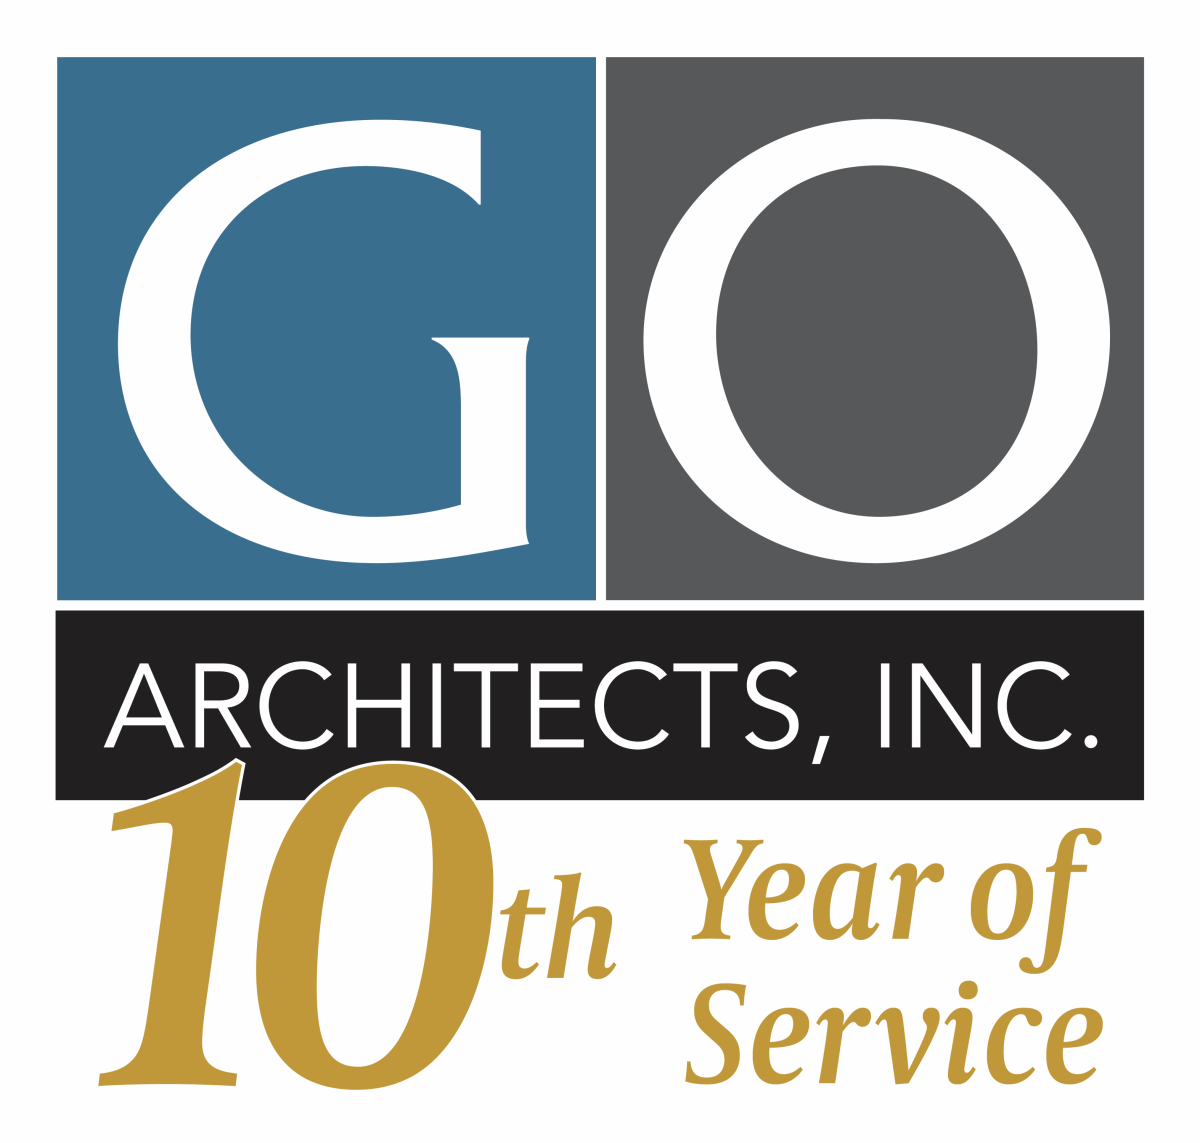 Go Architects, Inc. 10th Year of Service